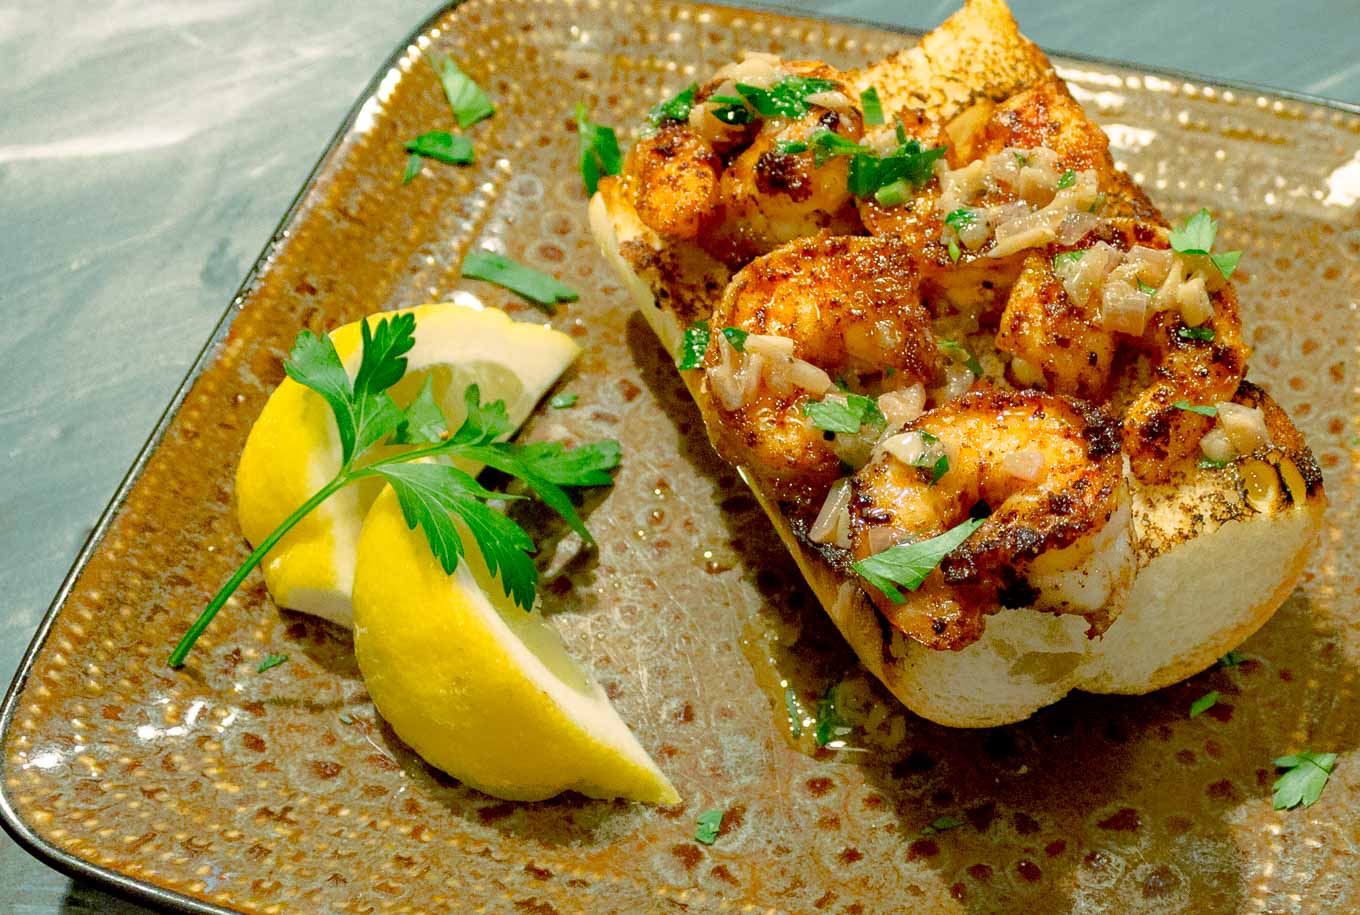 Spicy Shrimp Toasts with Lemon Garlic Butter shown at an angle on a brown square plate